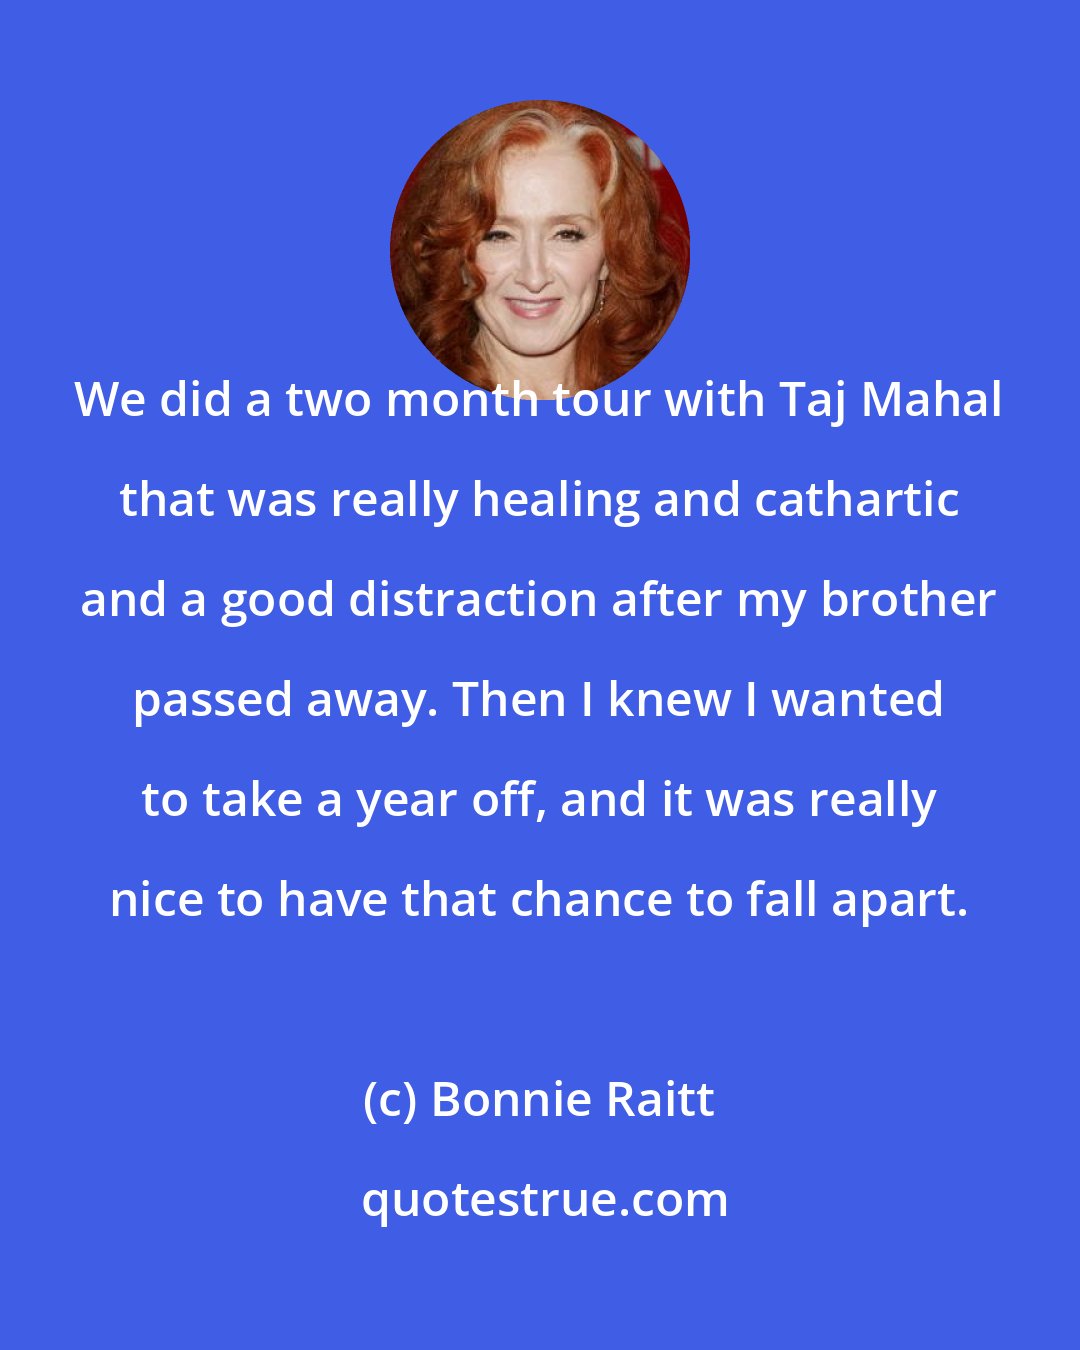 Bonnie Raitt: We did a two month tour with Taj Mahal that was really healing and cathartic and a good distraction after my brother passed away. Then I knew I wanted to take a year off, and it was really nice to have that chance to fall apart.